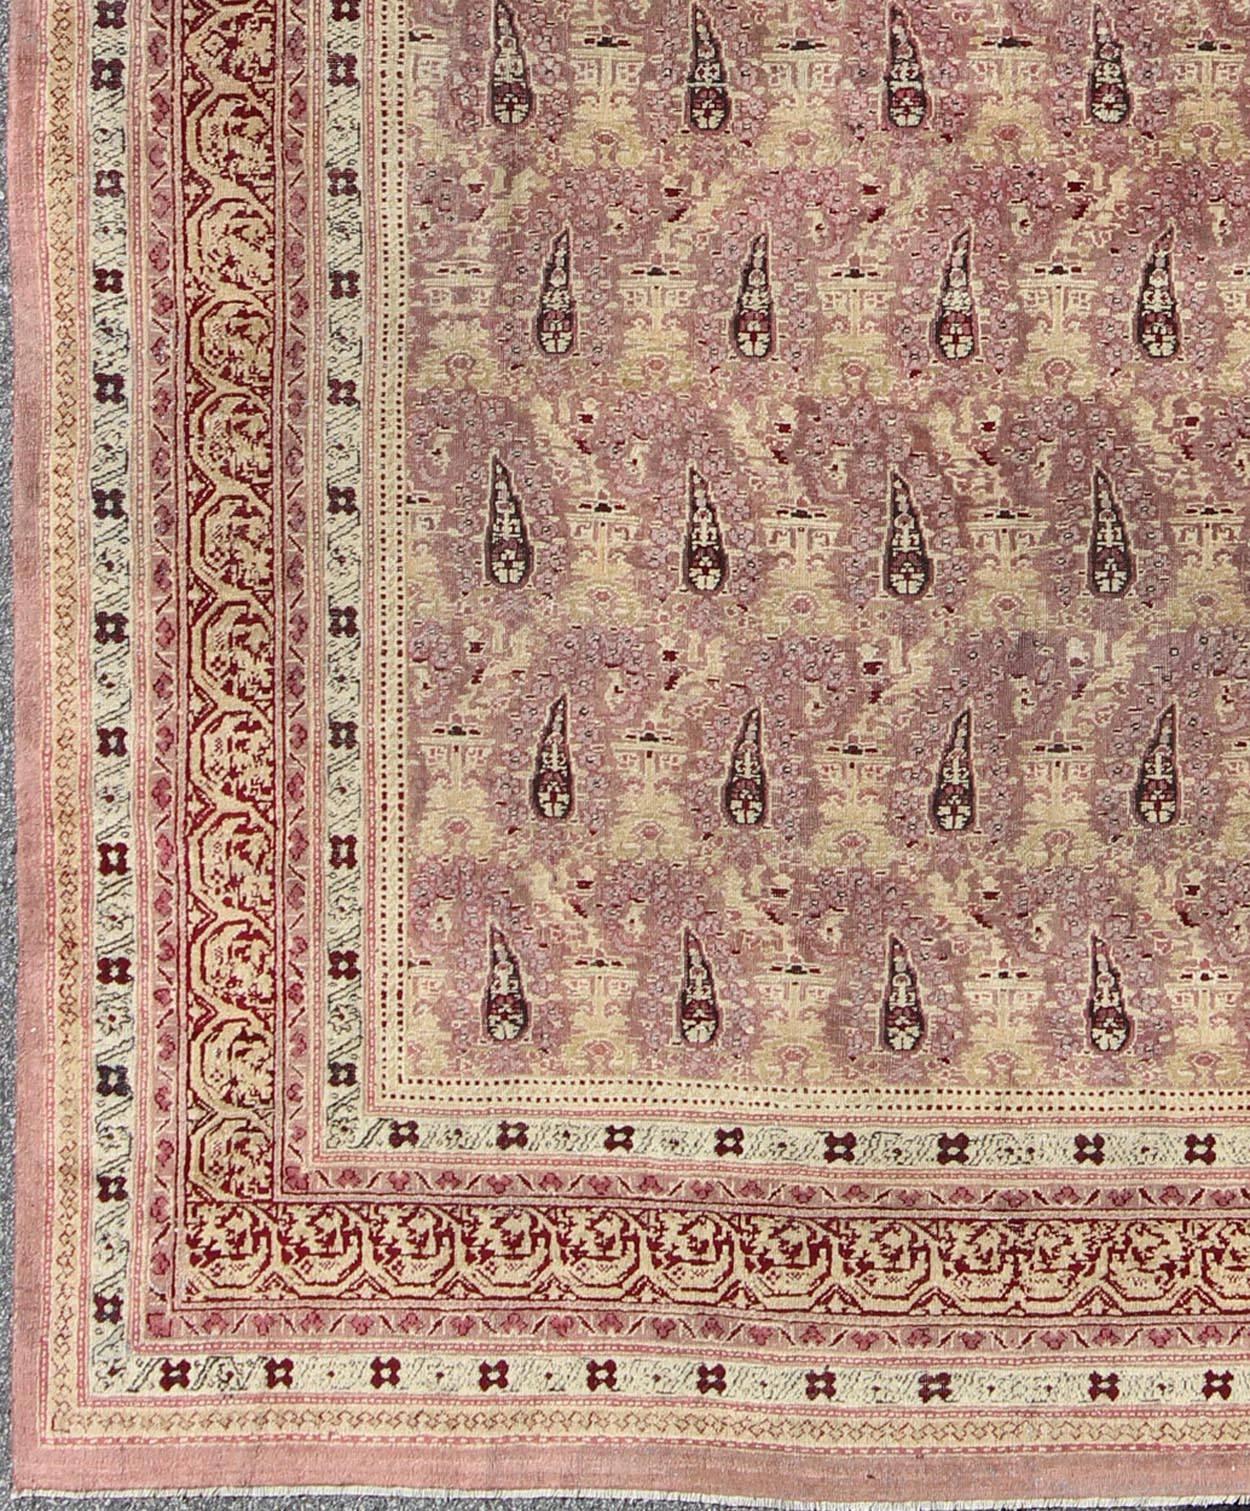  Antique Indian Amritsar rug with  all-over Paisley pattern in ivory, pink, Lavender, purple, Cream, light yellow & red. Antique Indian Amritsar rug, Keivan Woven Arts/ rug/ EBD-1001, country of origin / type: India / Amritsar, circa 1890

Measures: